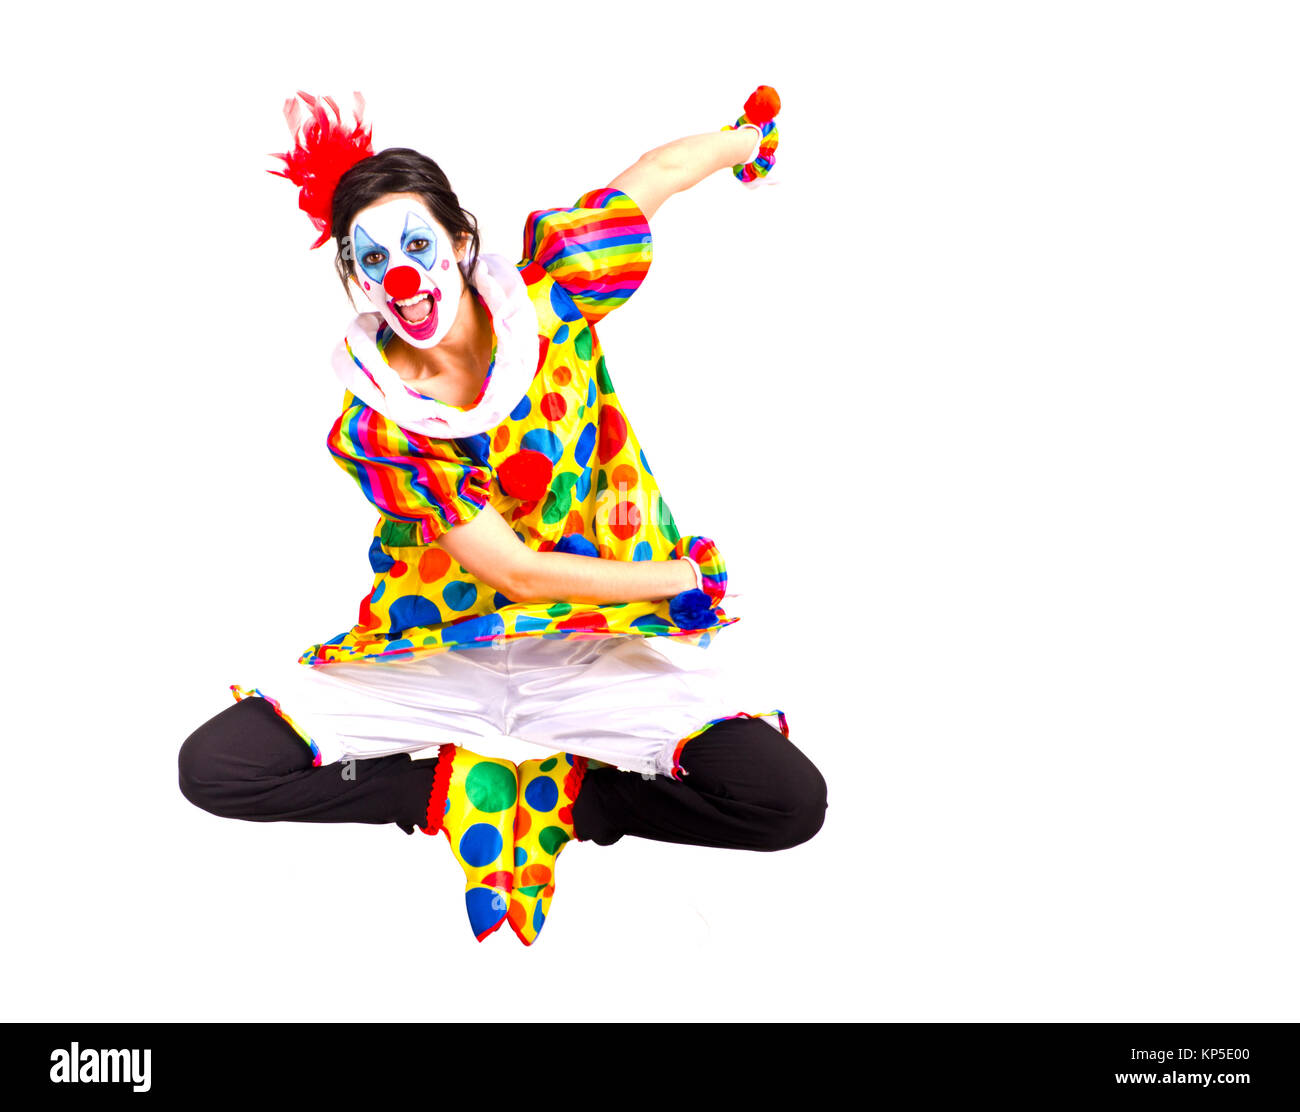 Color Clown Flies Jump Dancing into Air During Performance Stock Photo